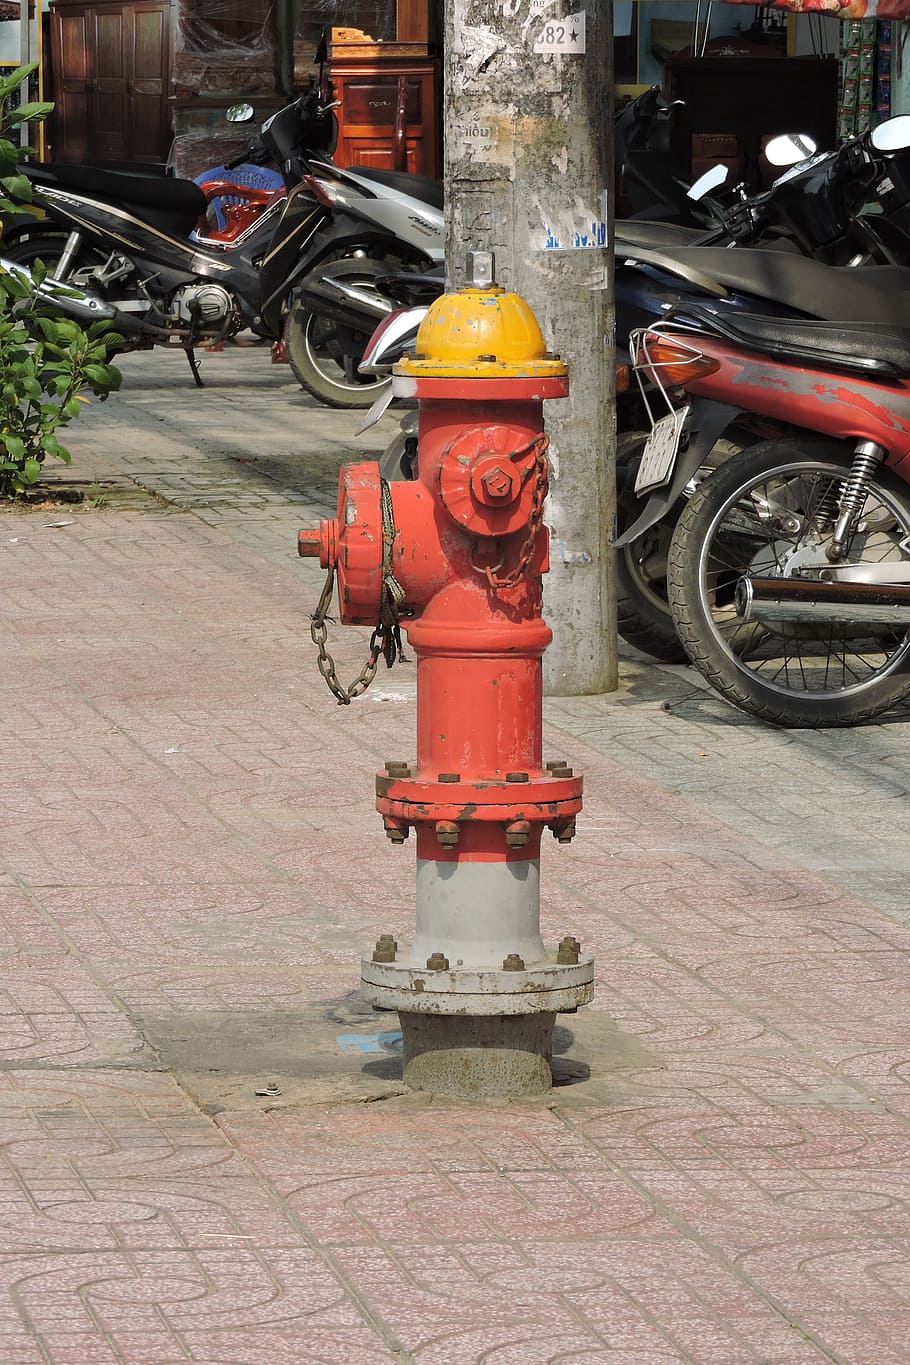 water tool, red, water, equipment, fire hydrant, protection, security, safety, footpath, day